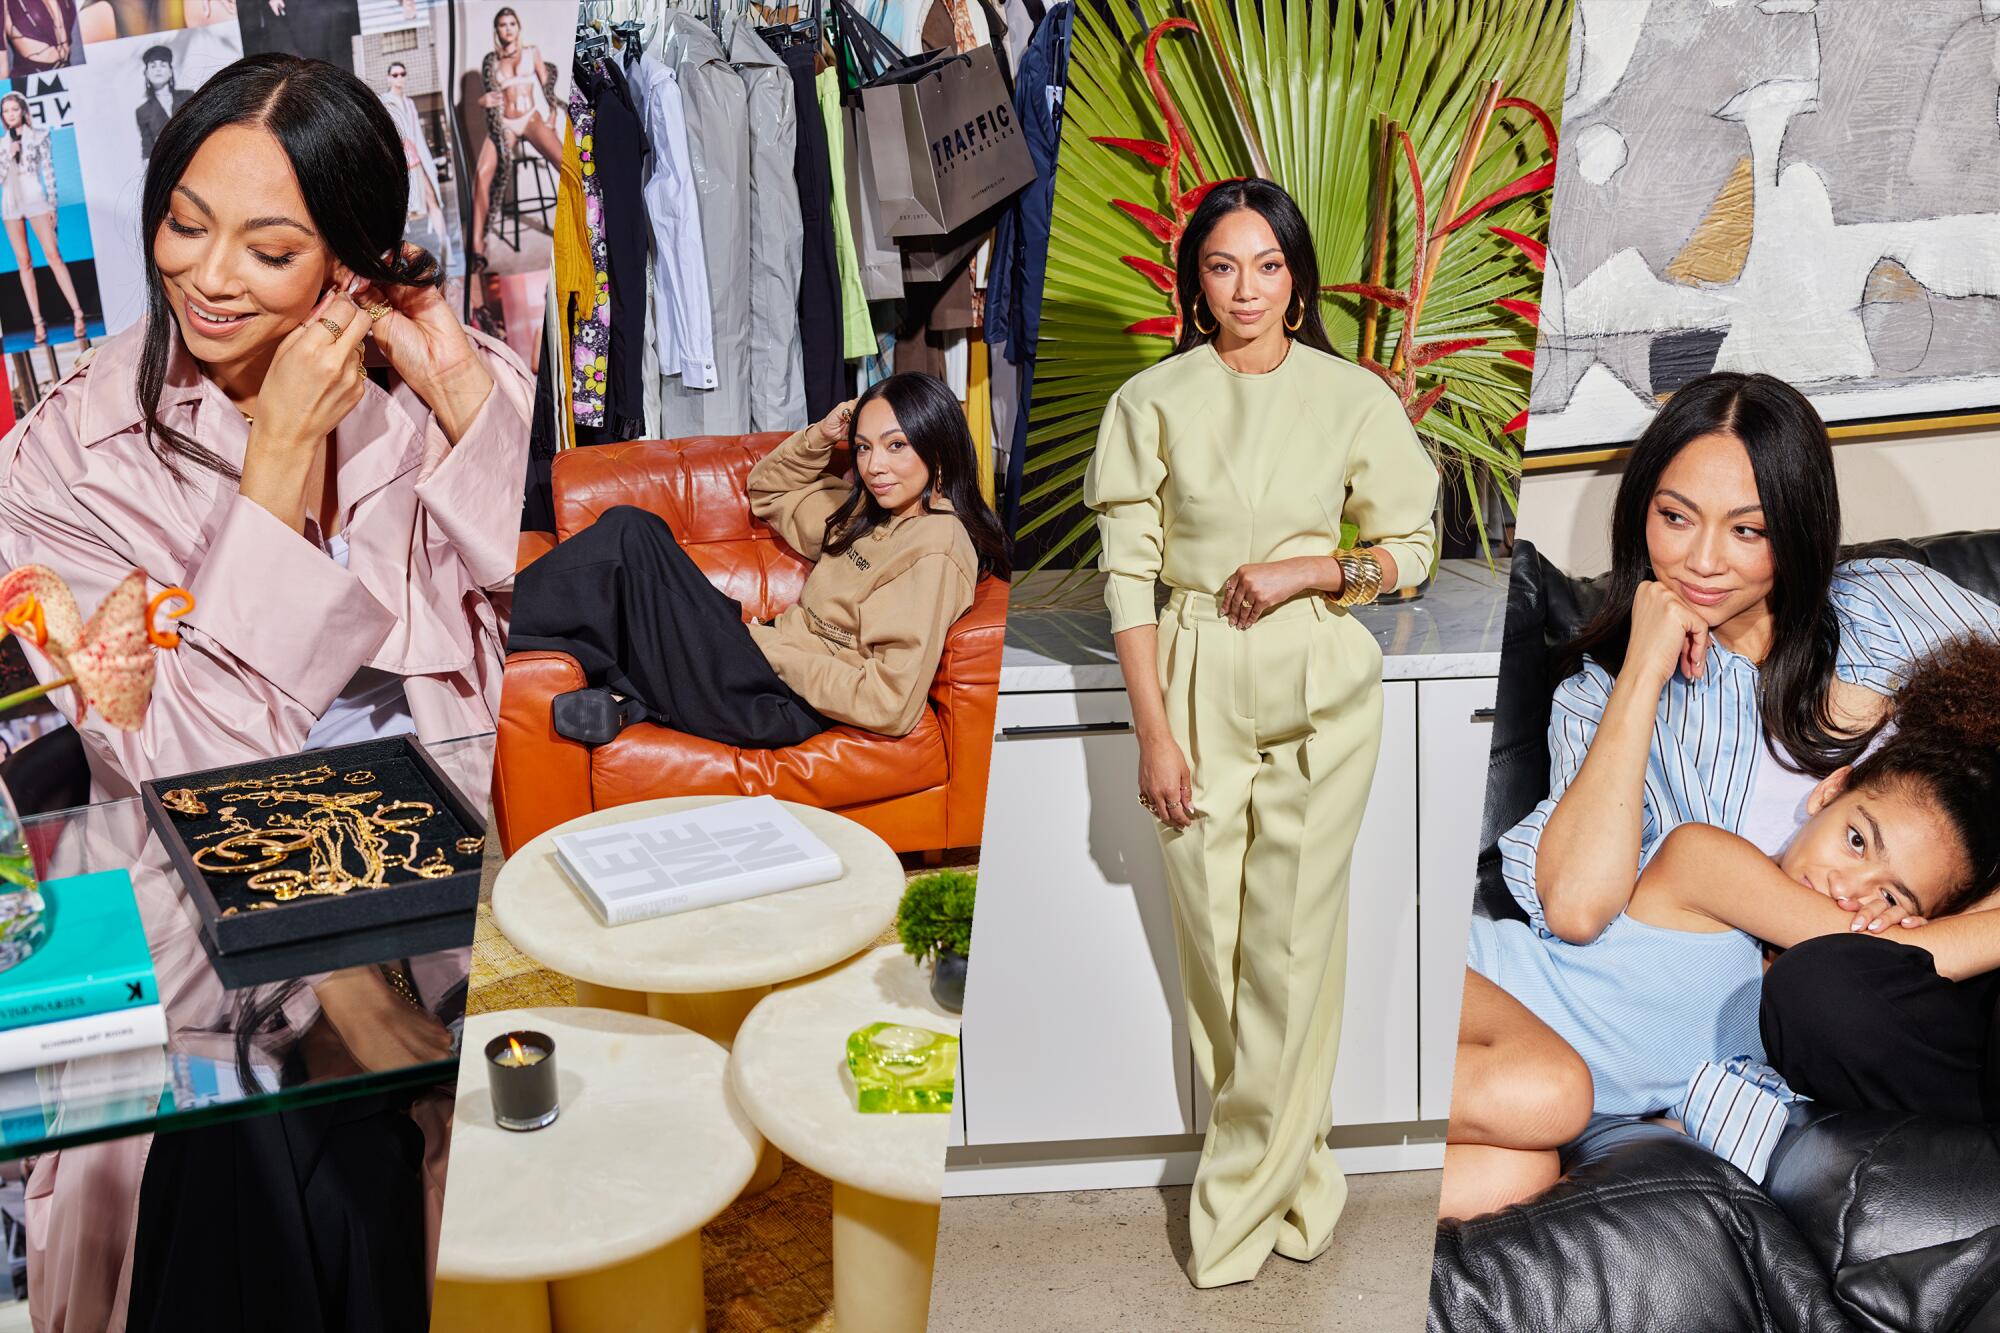 Hollywood stylist Monica Rose is changing the look of L.A. cool